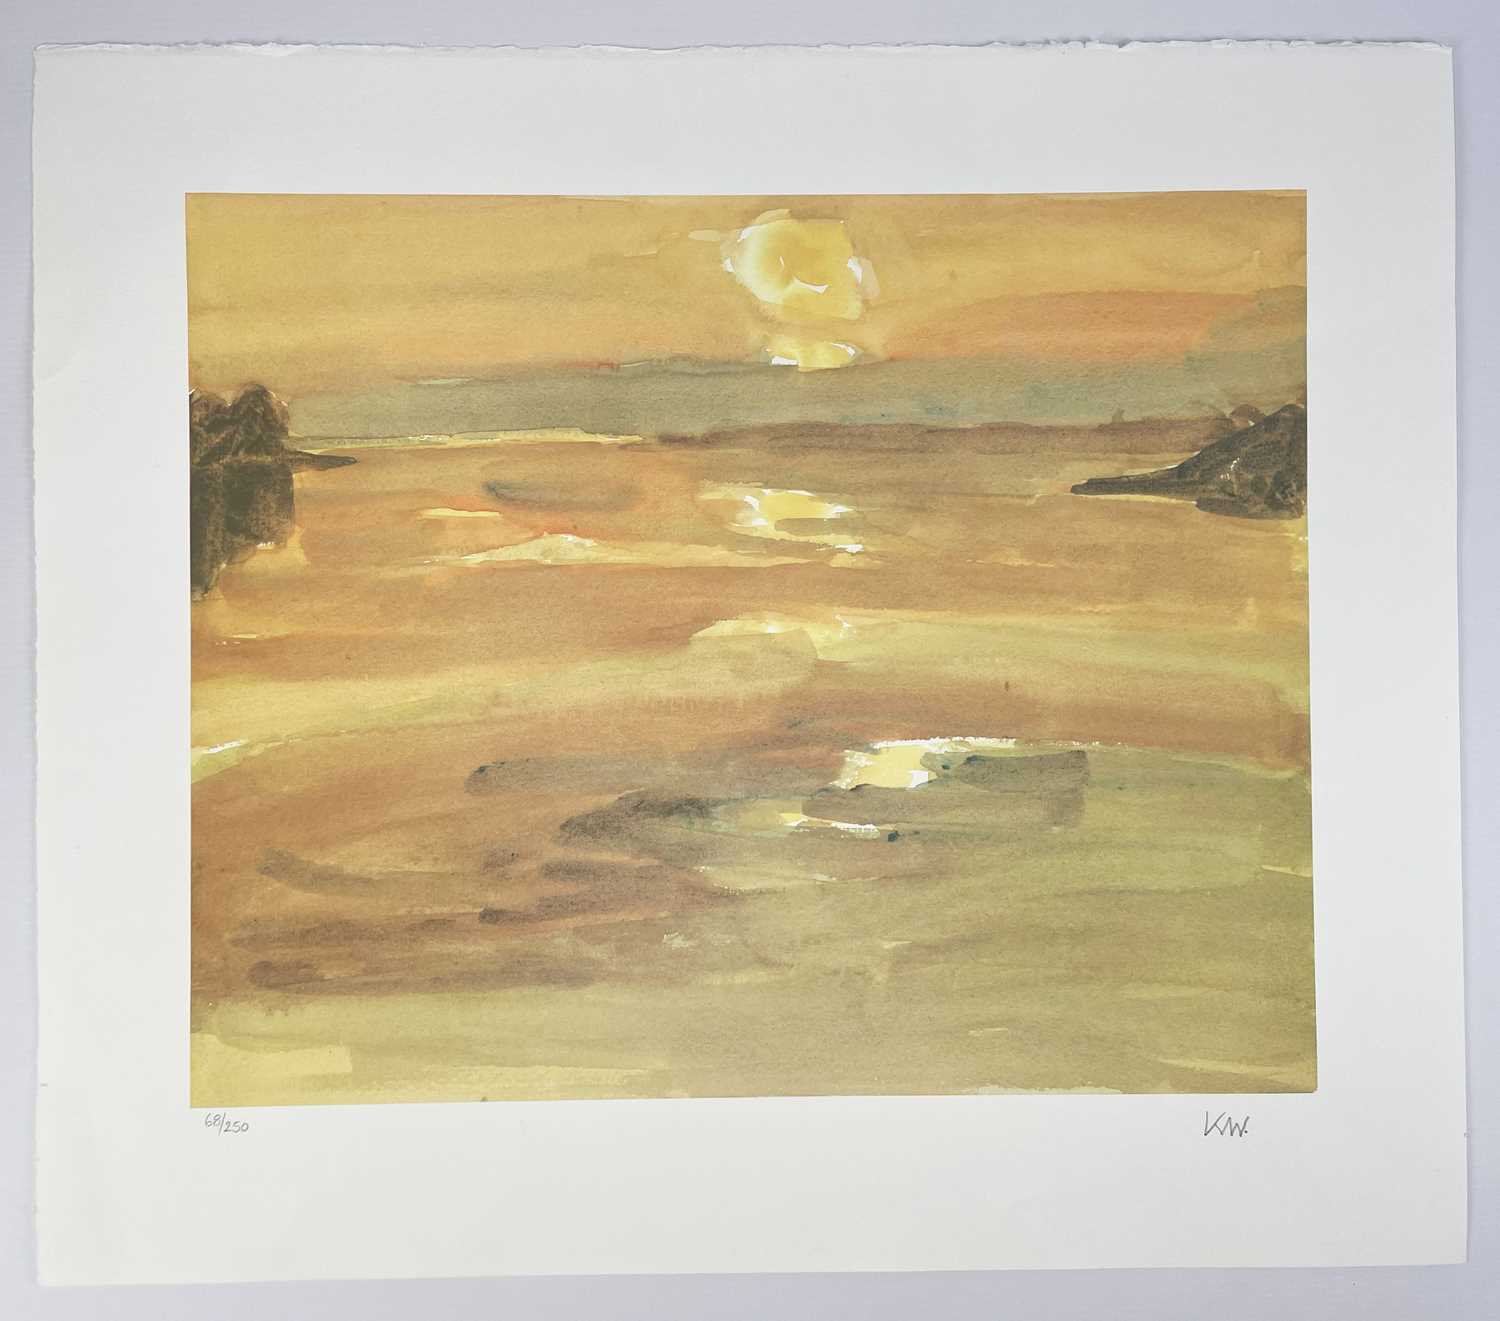 ‡ SIR KYFFIN WILLIAMS RA limited edition (68/250) print - sunset at Moel y Don on the Menai, - Image 2 of 2